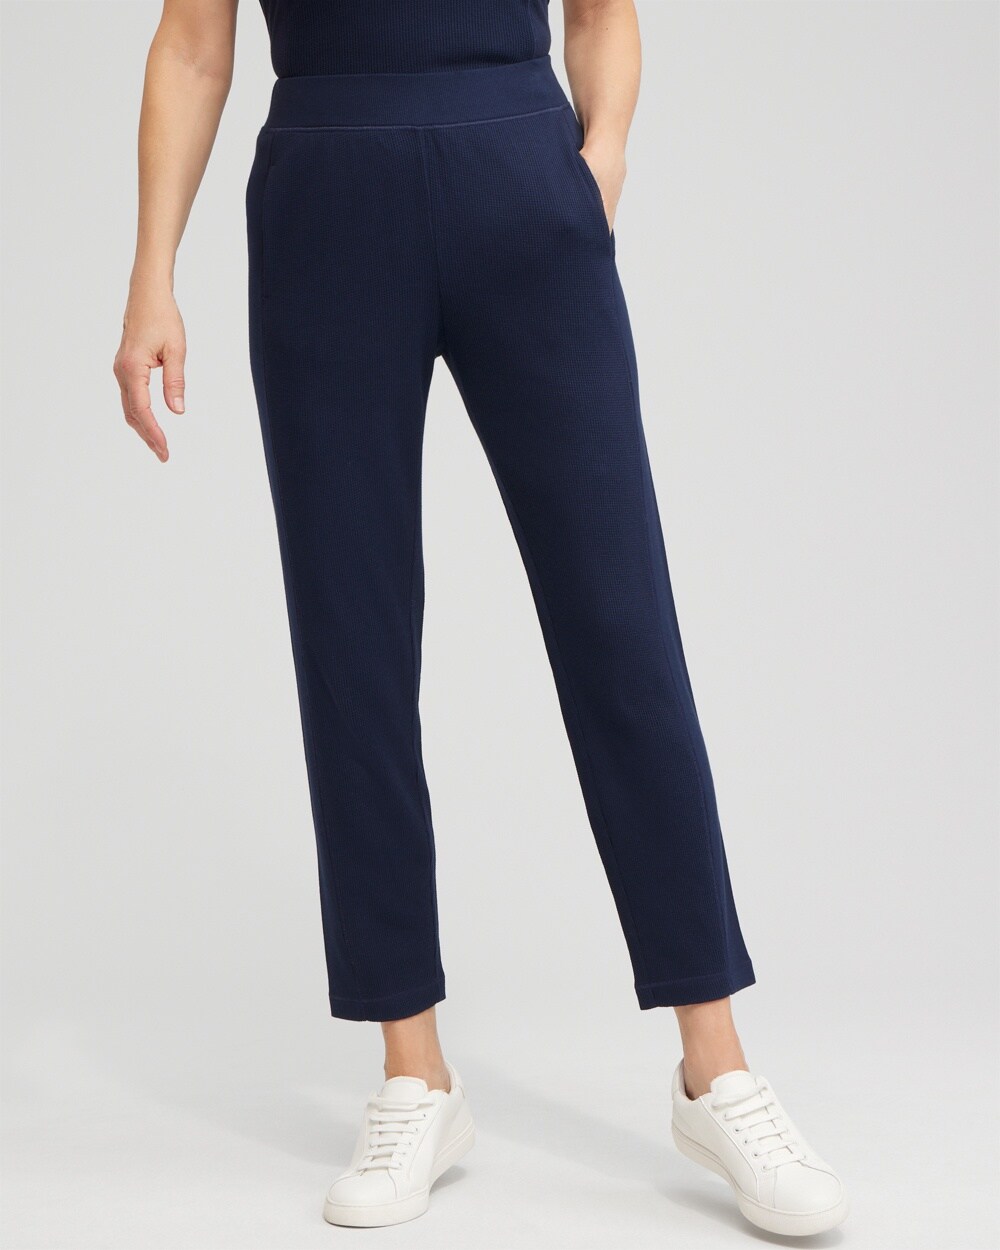 Chicos pull-on knit pants - Gem